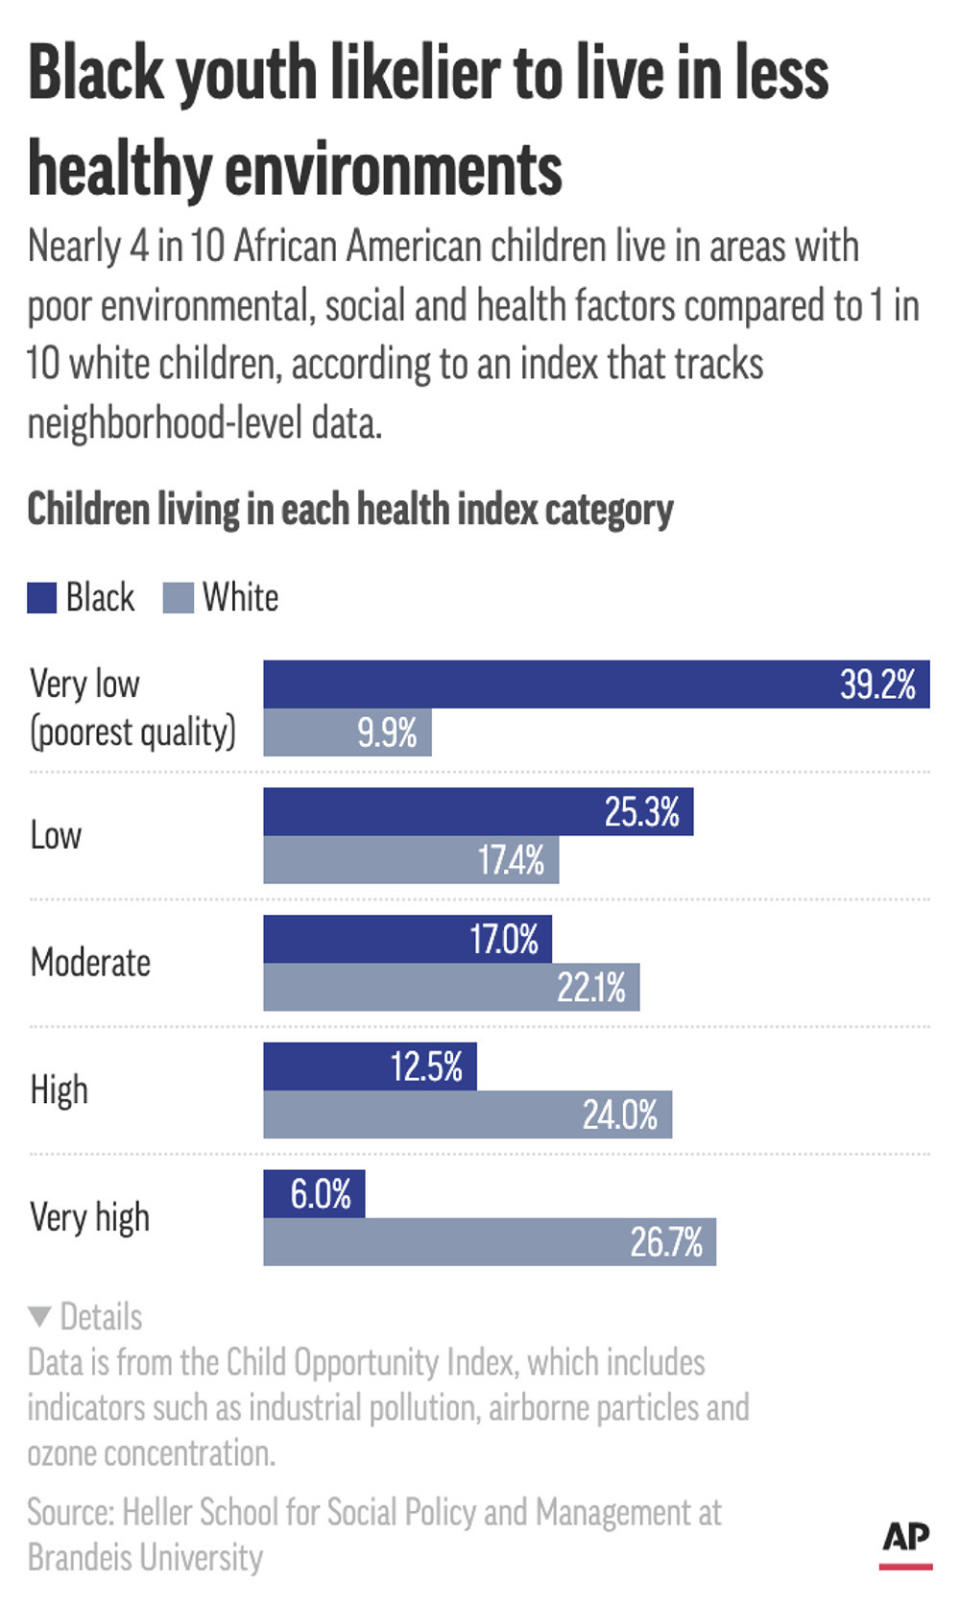 African American children are more likely to live in less healthy areas, according to the Child Opportunity Index, an Brandeis University analysis of neighborhood-level data on health, environmental and social factors. (AP Digital Embed)